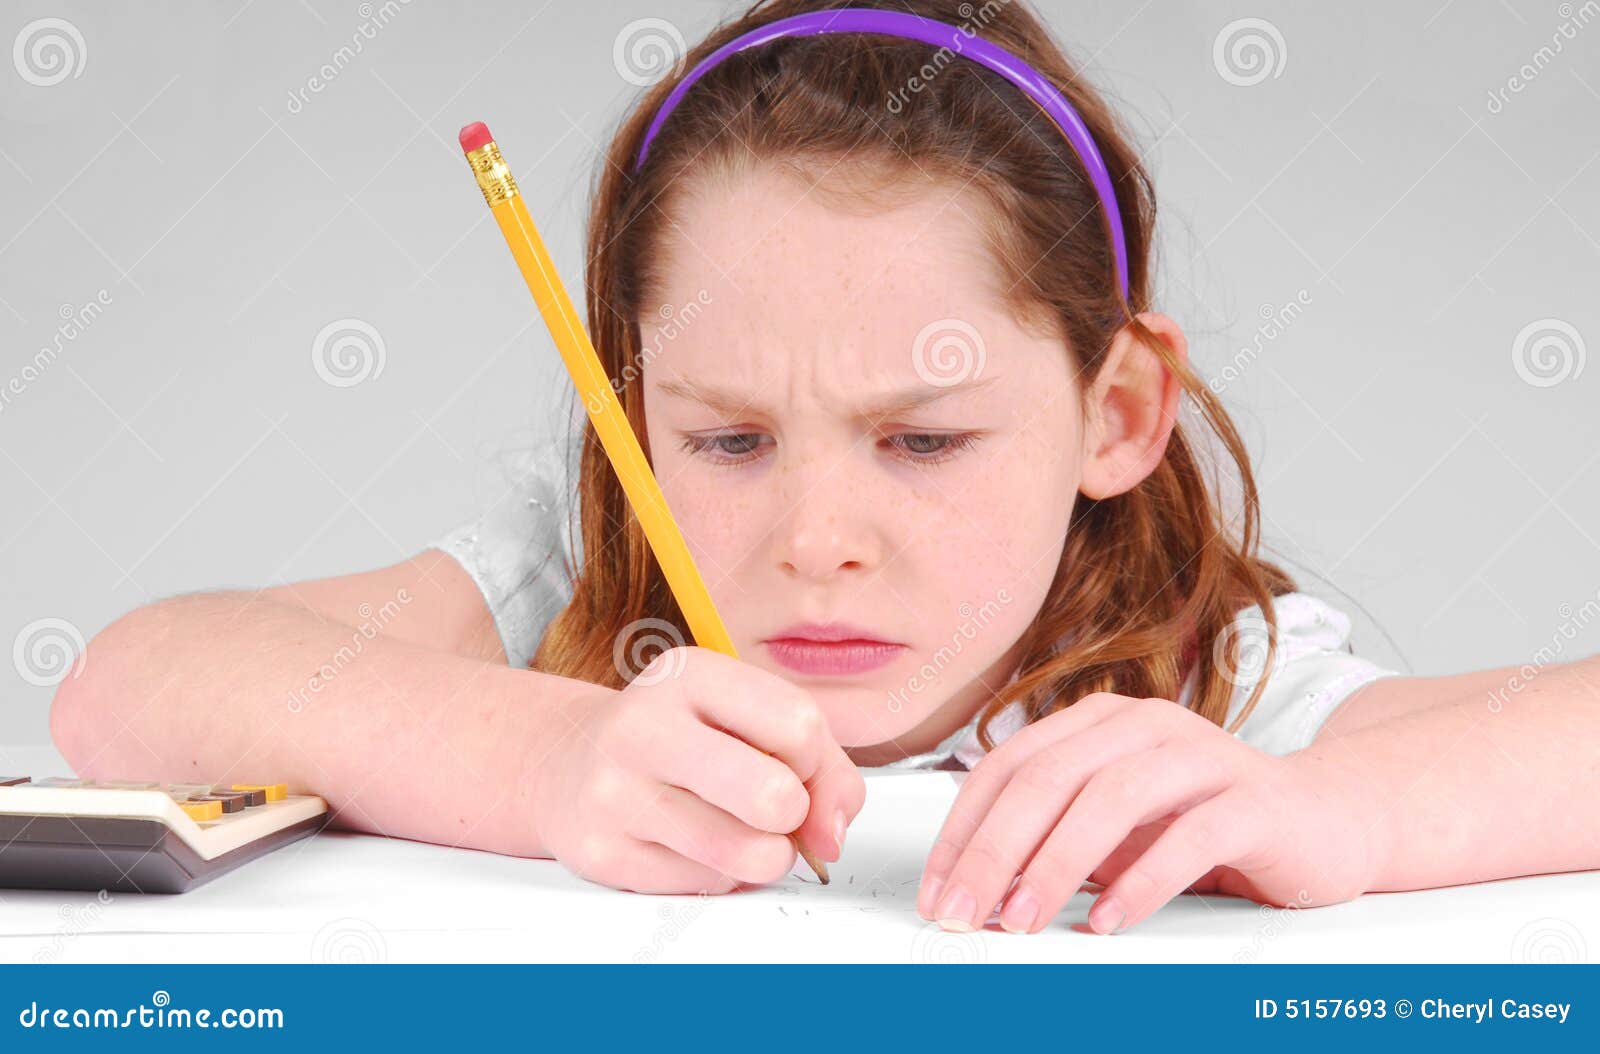 girl concentrating